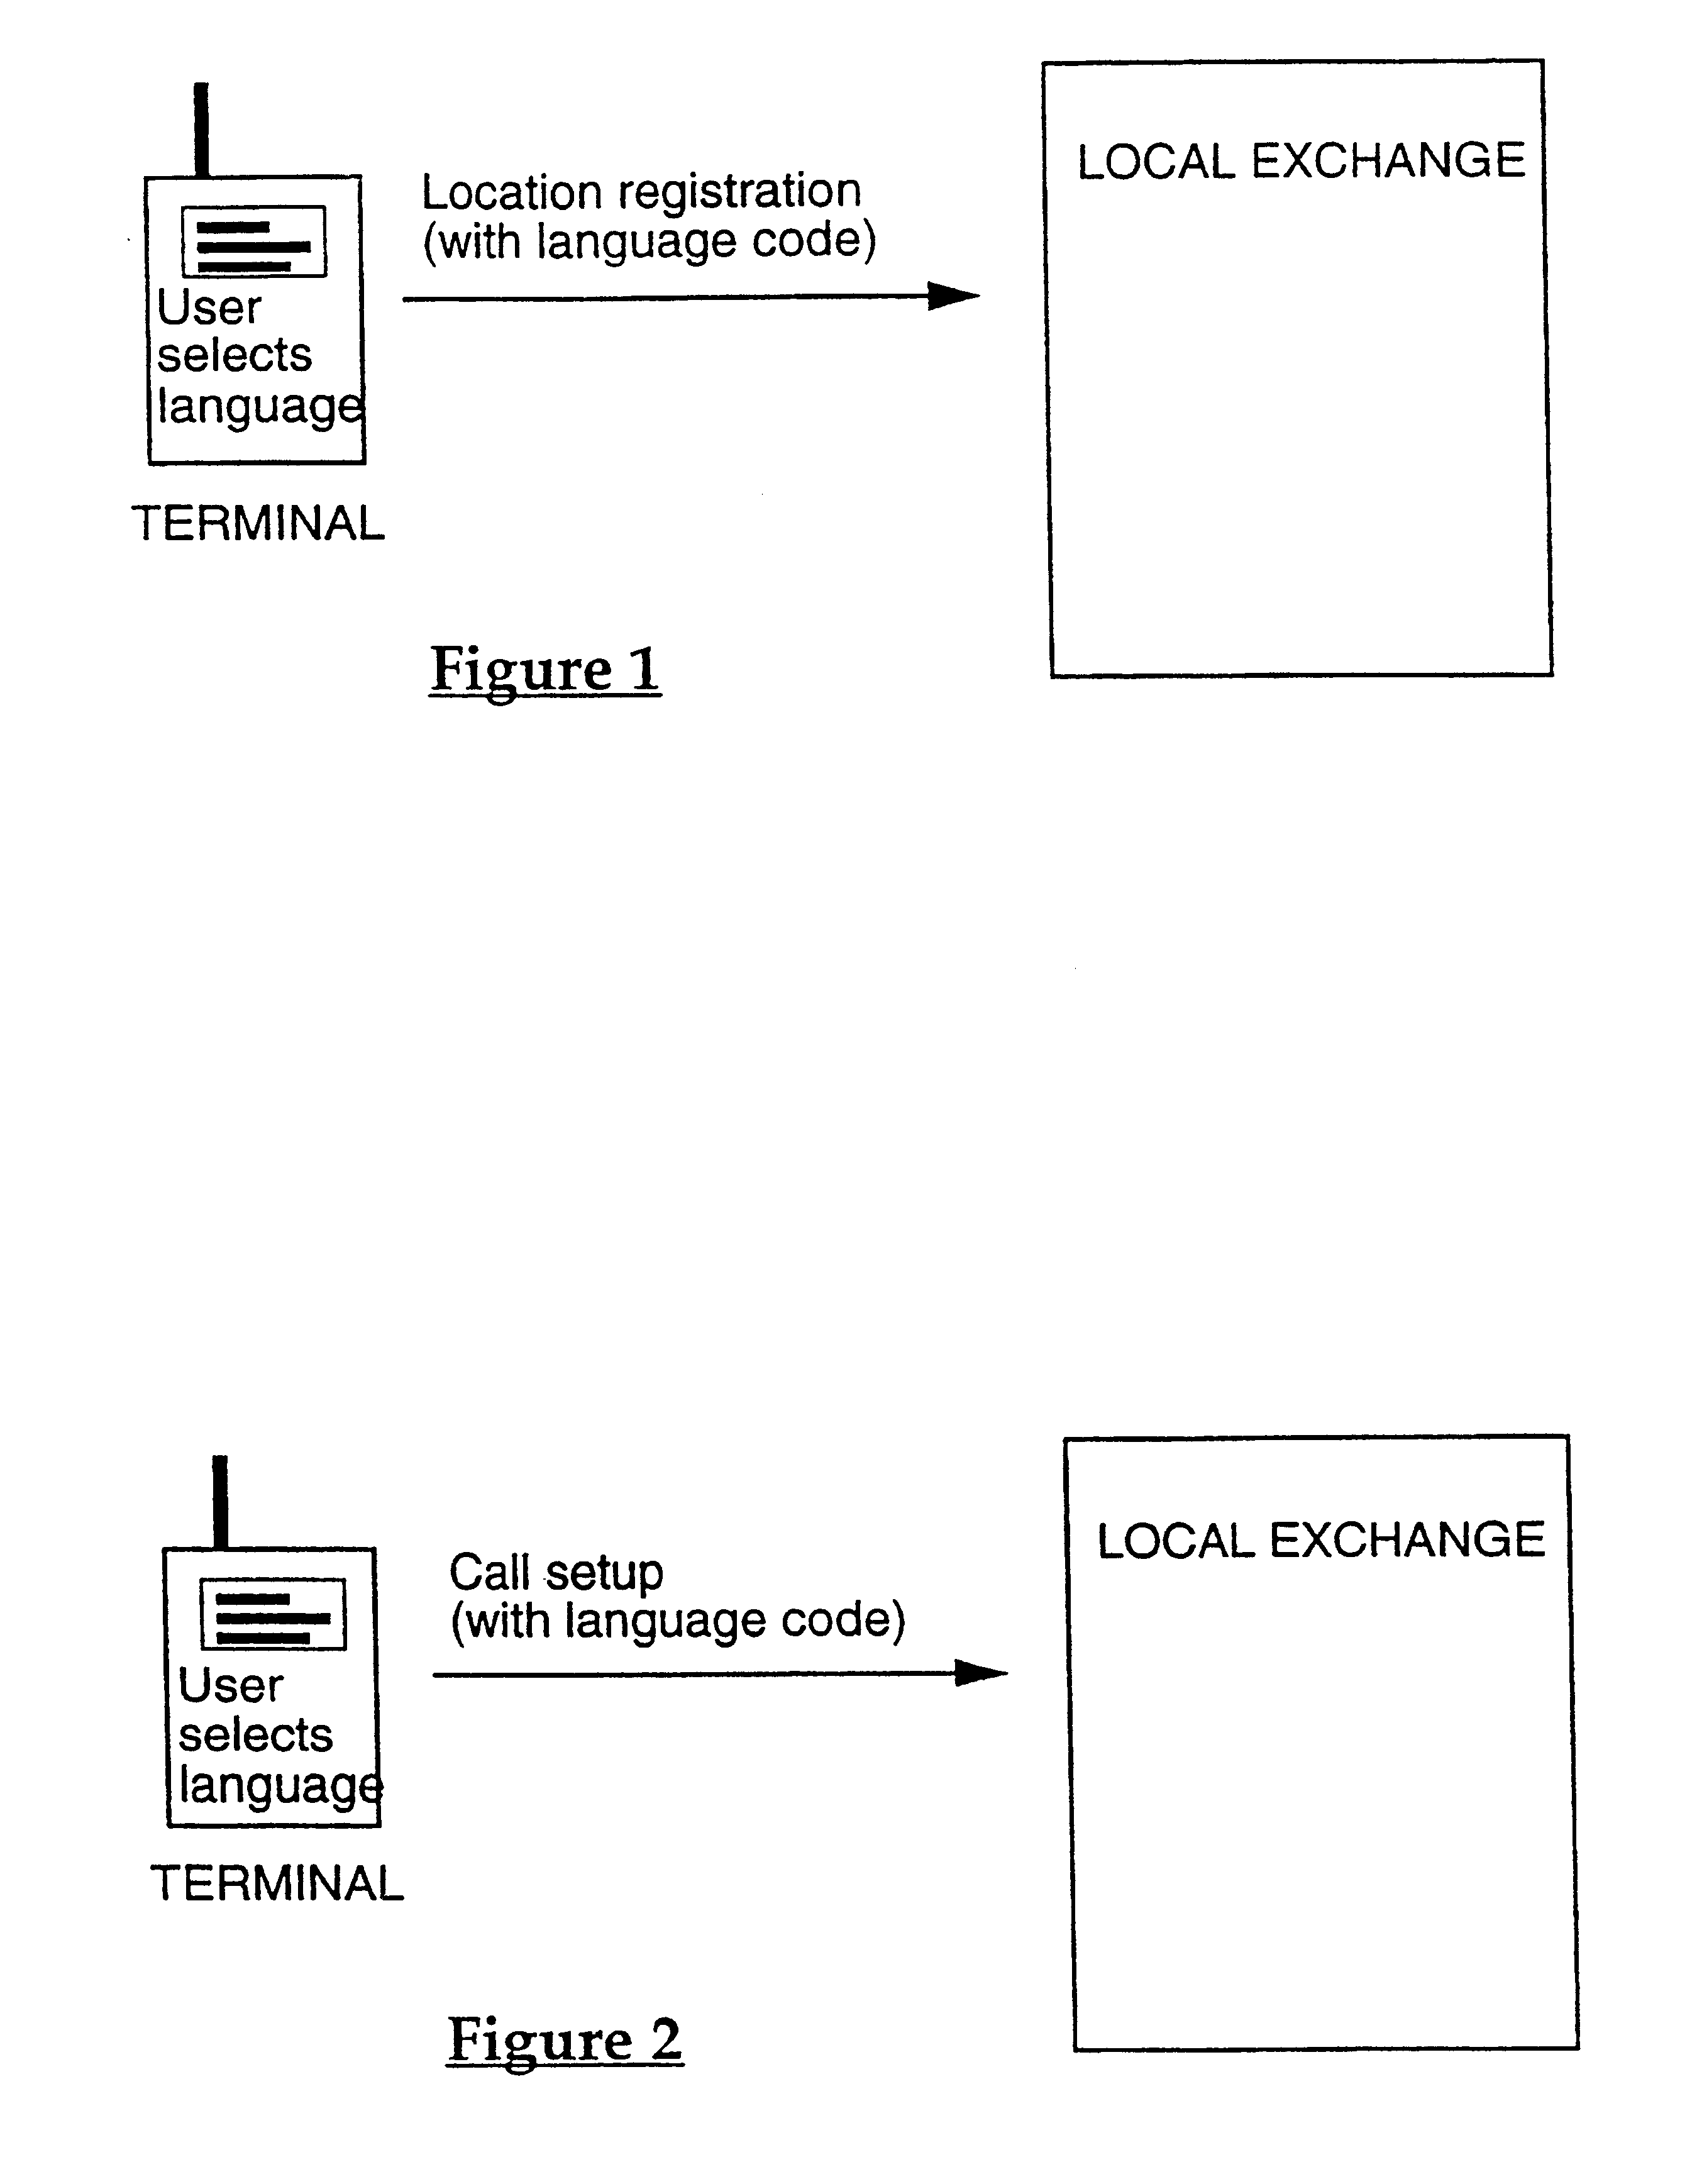 Method for passing information between a local exchange and a user/terminal